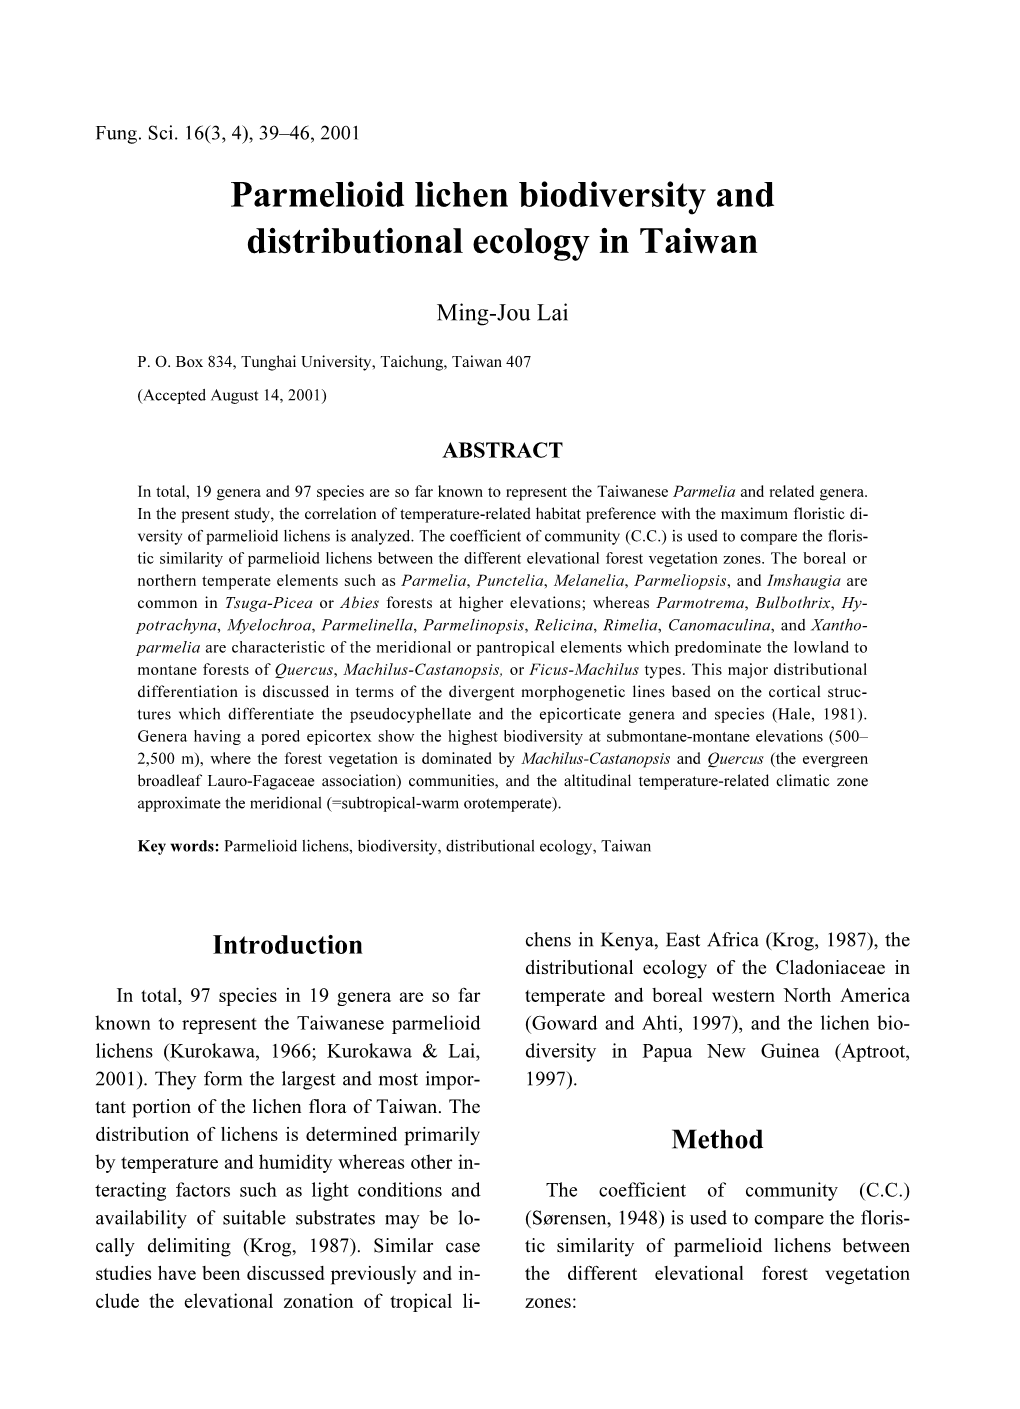 Parmelioid Lichen Biodiversity and Distributional Ecology in Taiwan